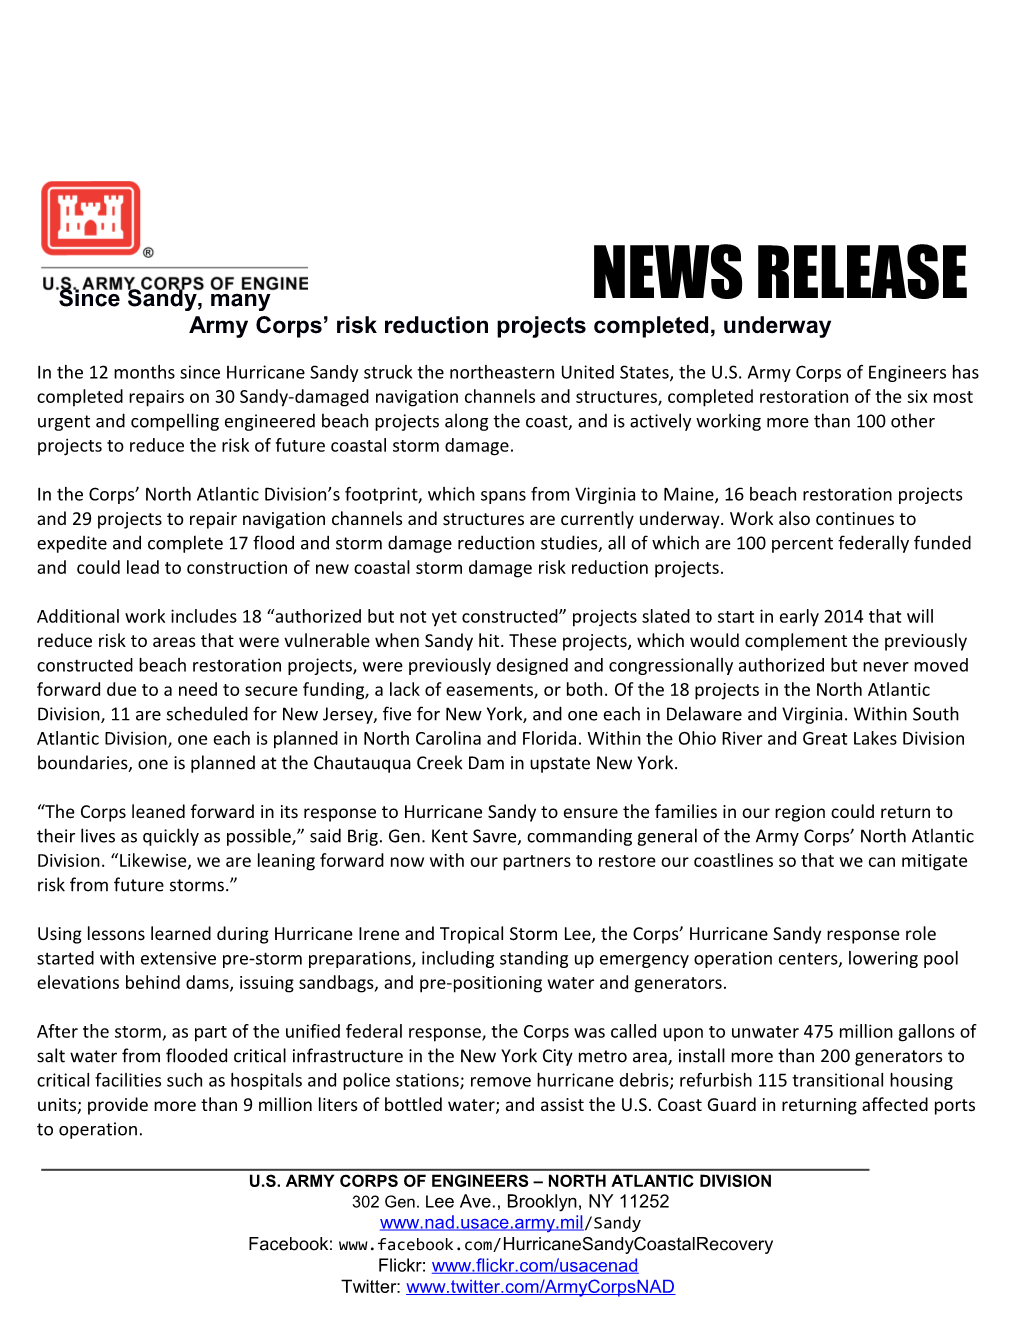 Since Sandy, Many Army Corps Risk Reduction Projects Completed, Underway